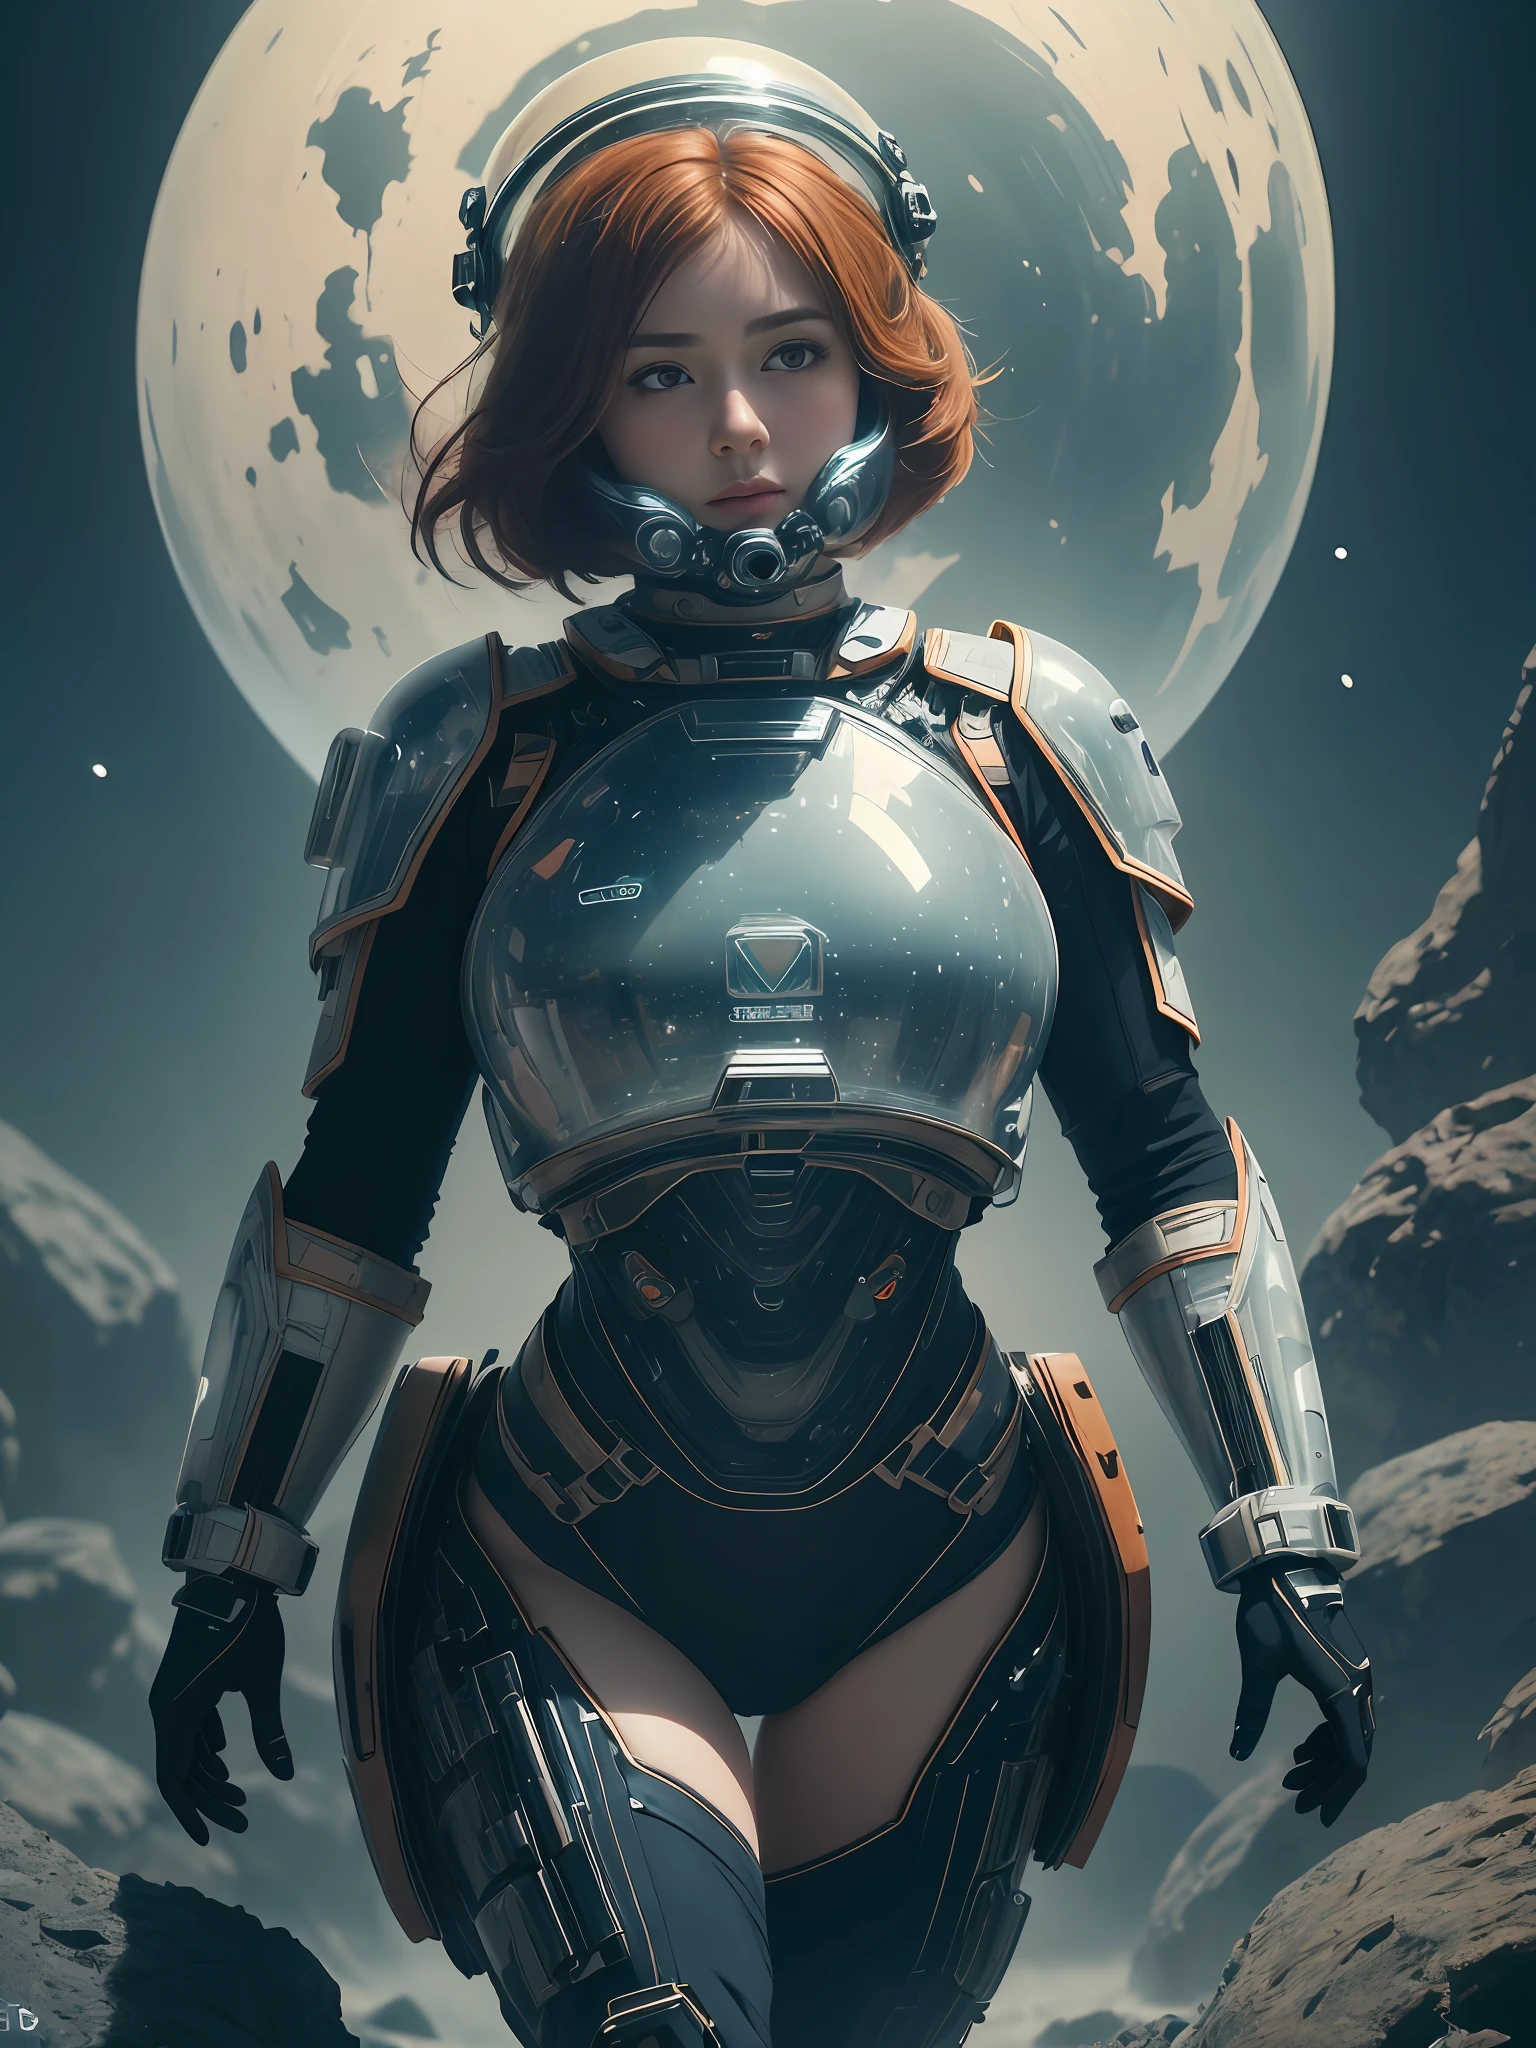 best quality, particle effect, raytracing, scening lighting, perfect lighting, masterpiece ,(female space soldier, wearing orange and white space suit, helmet, tined face shield, rebreather, accentuated booty) ,8k resolution, pretty face, chubby body, voluptous, wide hips, perfect face,, Intricately detailed cinematic film still,cute, perfect face, (highly detailed, hyperdetailed), natural lighting, auburn hair, alien planet backround, purity seals, perfect eyes,  full body, cinematic film still from Gravity 2013, best quality, particle effect, raytracing, scening lighting, perfect lighting, masterpiece ,beautiful  female space fairer looking out at the horizon, pov ,8k resolution, pretty face, chubby body, voluptous, wide hips, perfect face,, Intricately detailed cinematic film still,cute, perfect face, (highly detailed, hyperdetailed), natural lighting, red hair, alien planet backround, purity seals, perfect eyes,  full body, tentalce sex, eurasian facial features